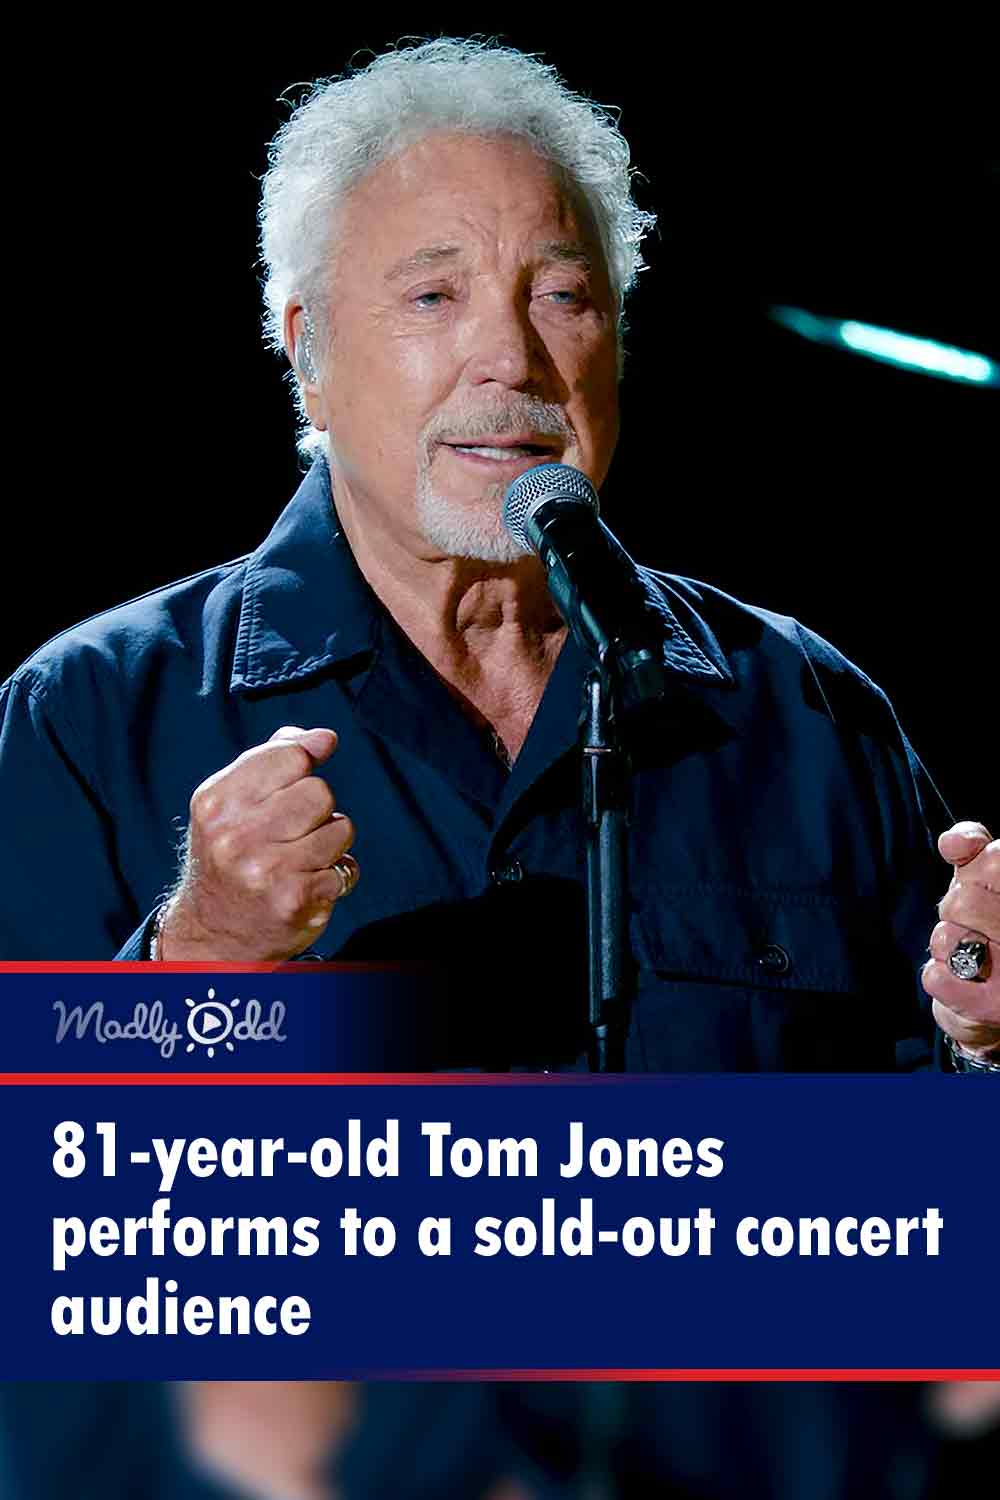 81-year-old Tom Jones performs to a sold-out concert audience